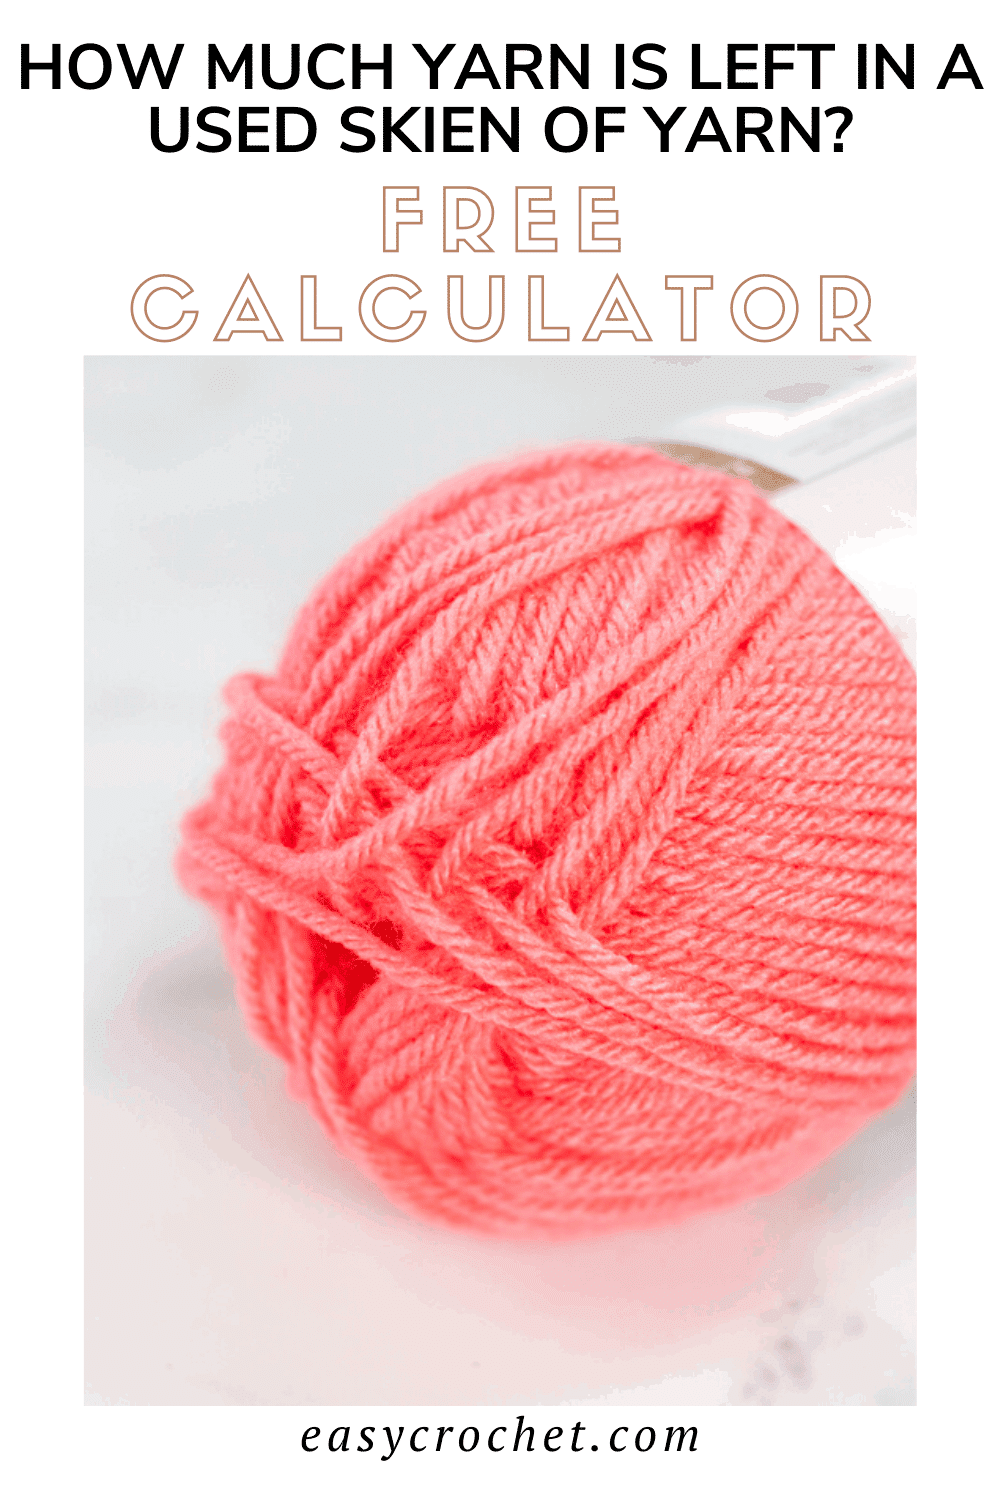 Free Yarn Yardage Calculator. Figure out how much yarn you used in a project! Free tool for crocheters & knitters! via @easycrochetcom